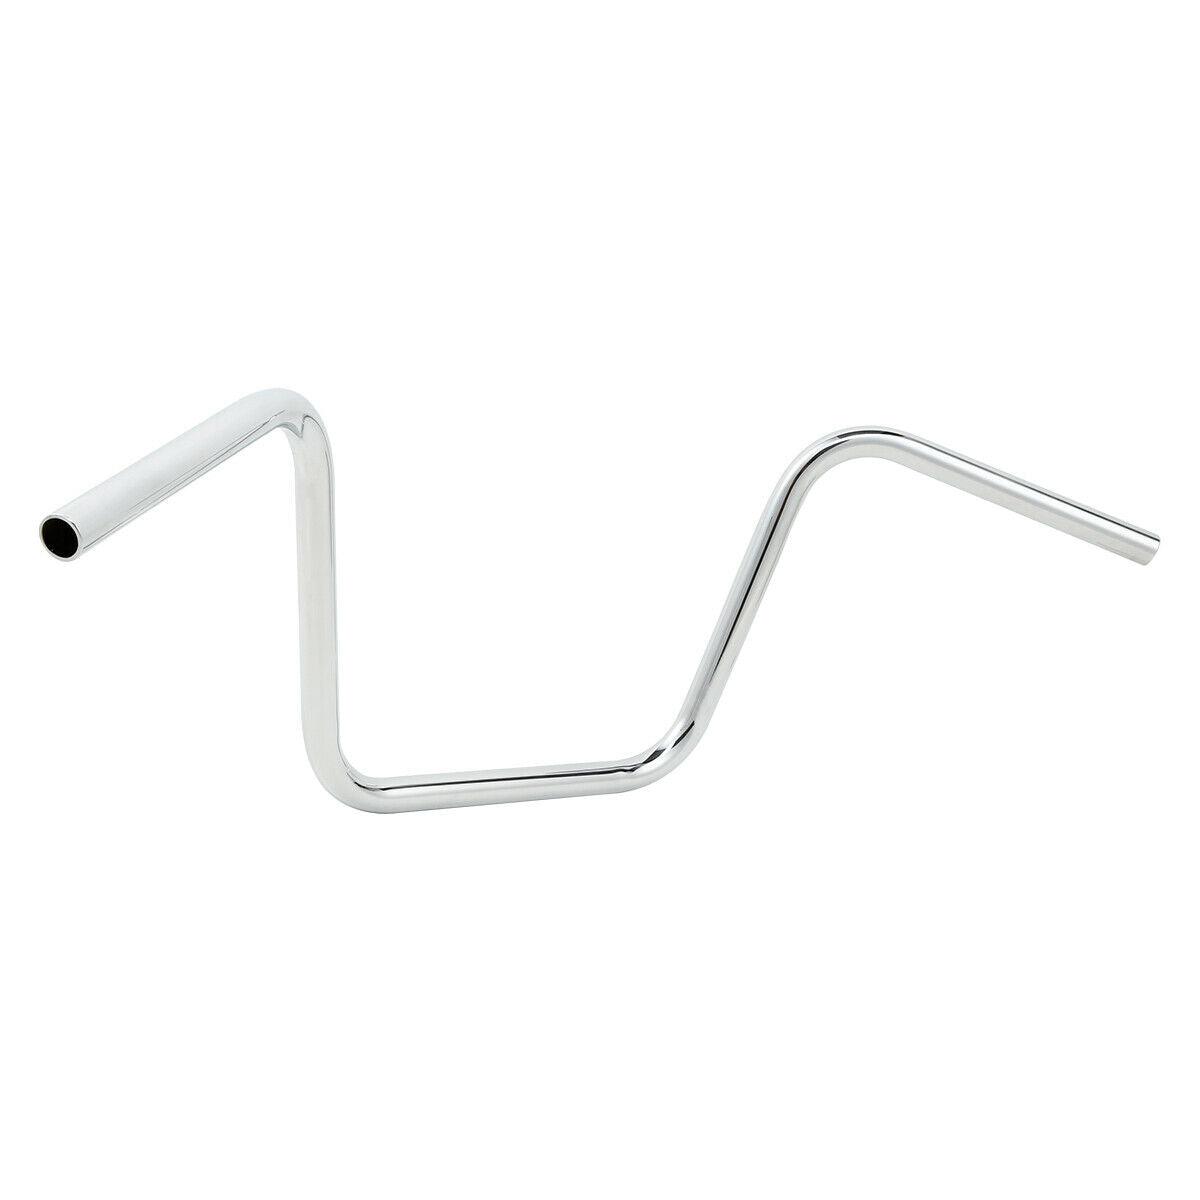 Chrome 12" Rise Ape Hanger Bar Handlebar Fit For Harley Sportster Softail Dyna - Moto Life Products